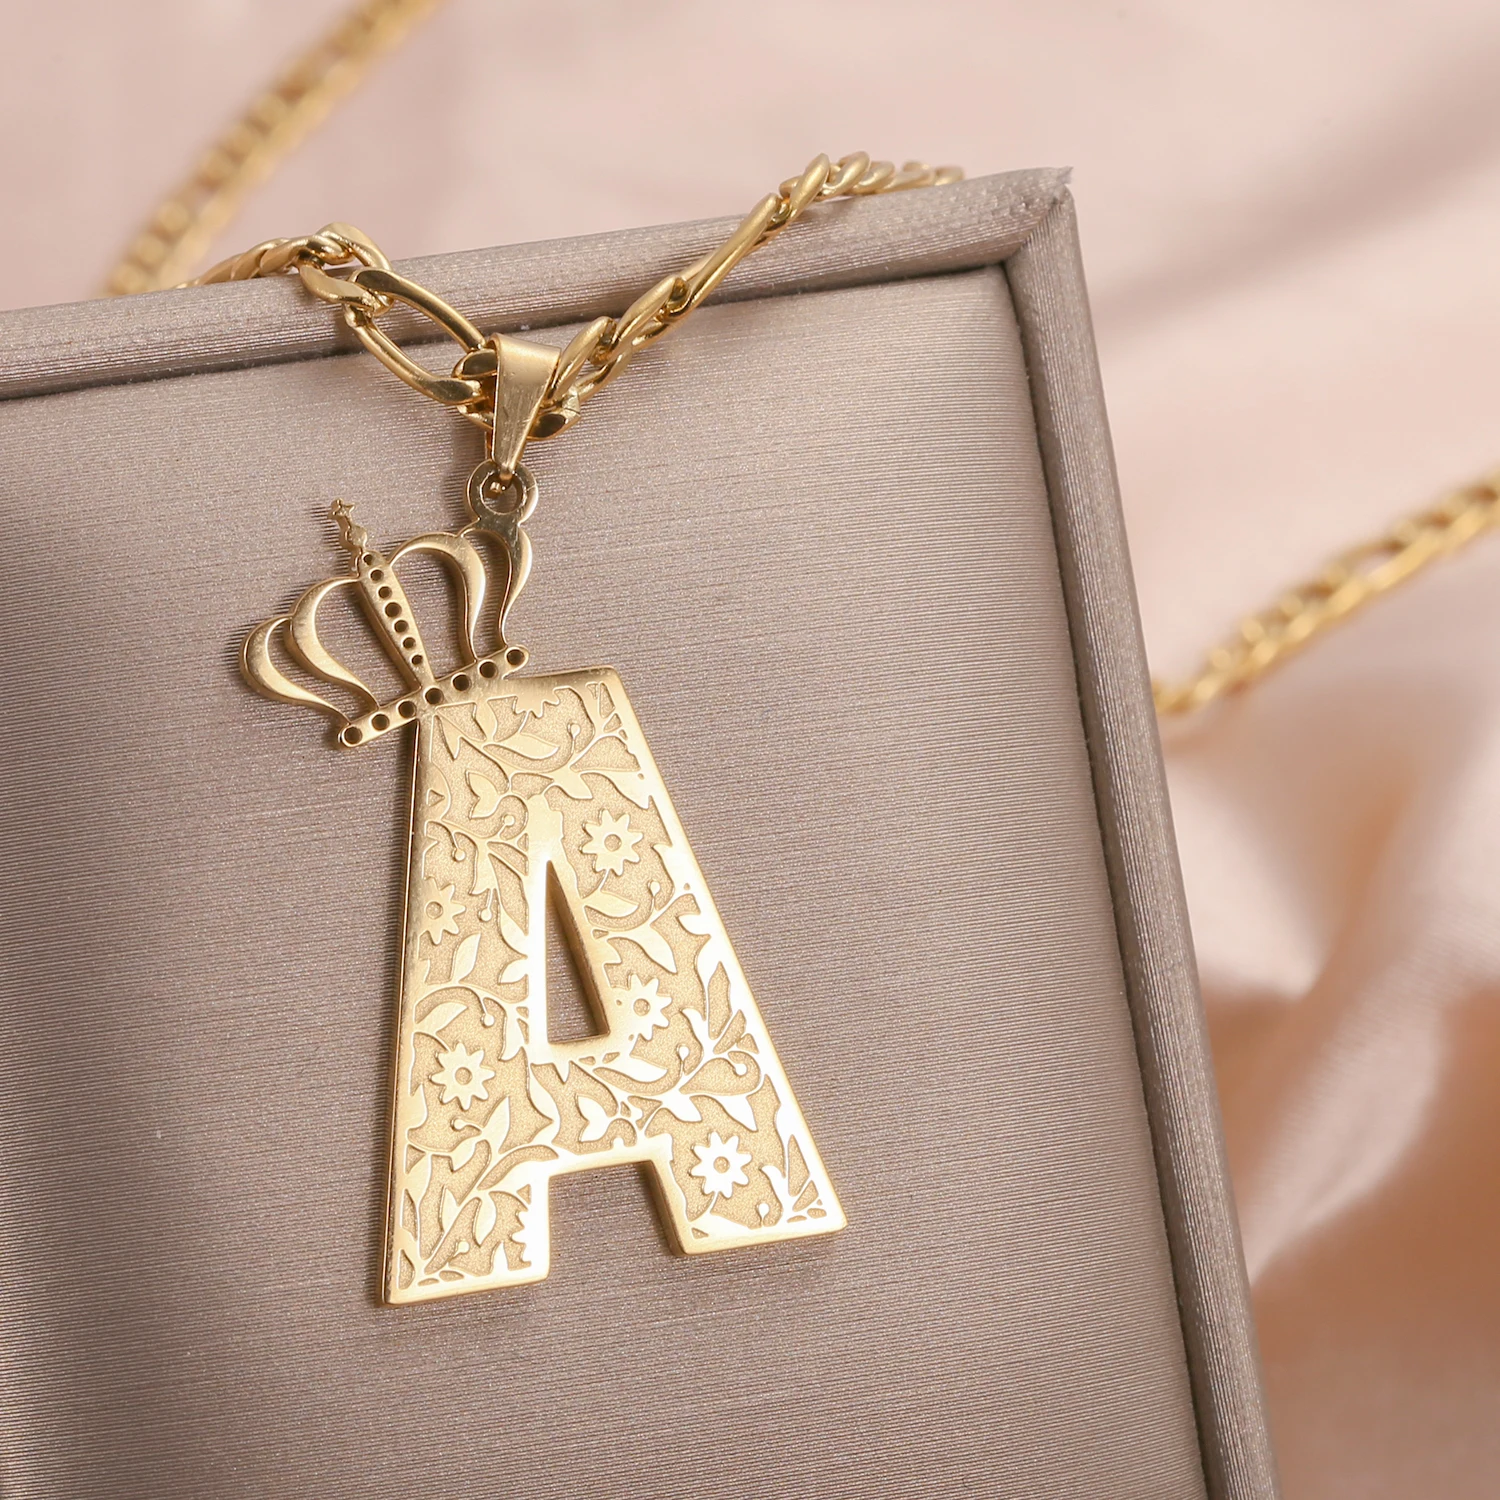 

A-Z Crown Letters Necklaces For Women Initials Chain Stainless Steel Necklace Pendants Men's Hip Hop Jewelry Mother's Day Gift